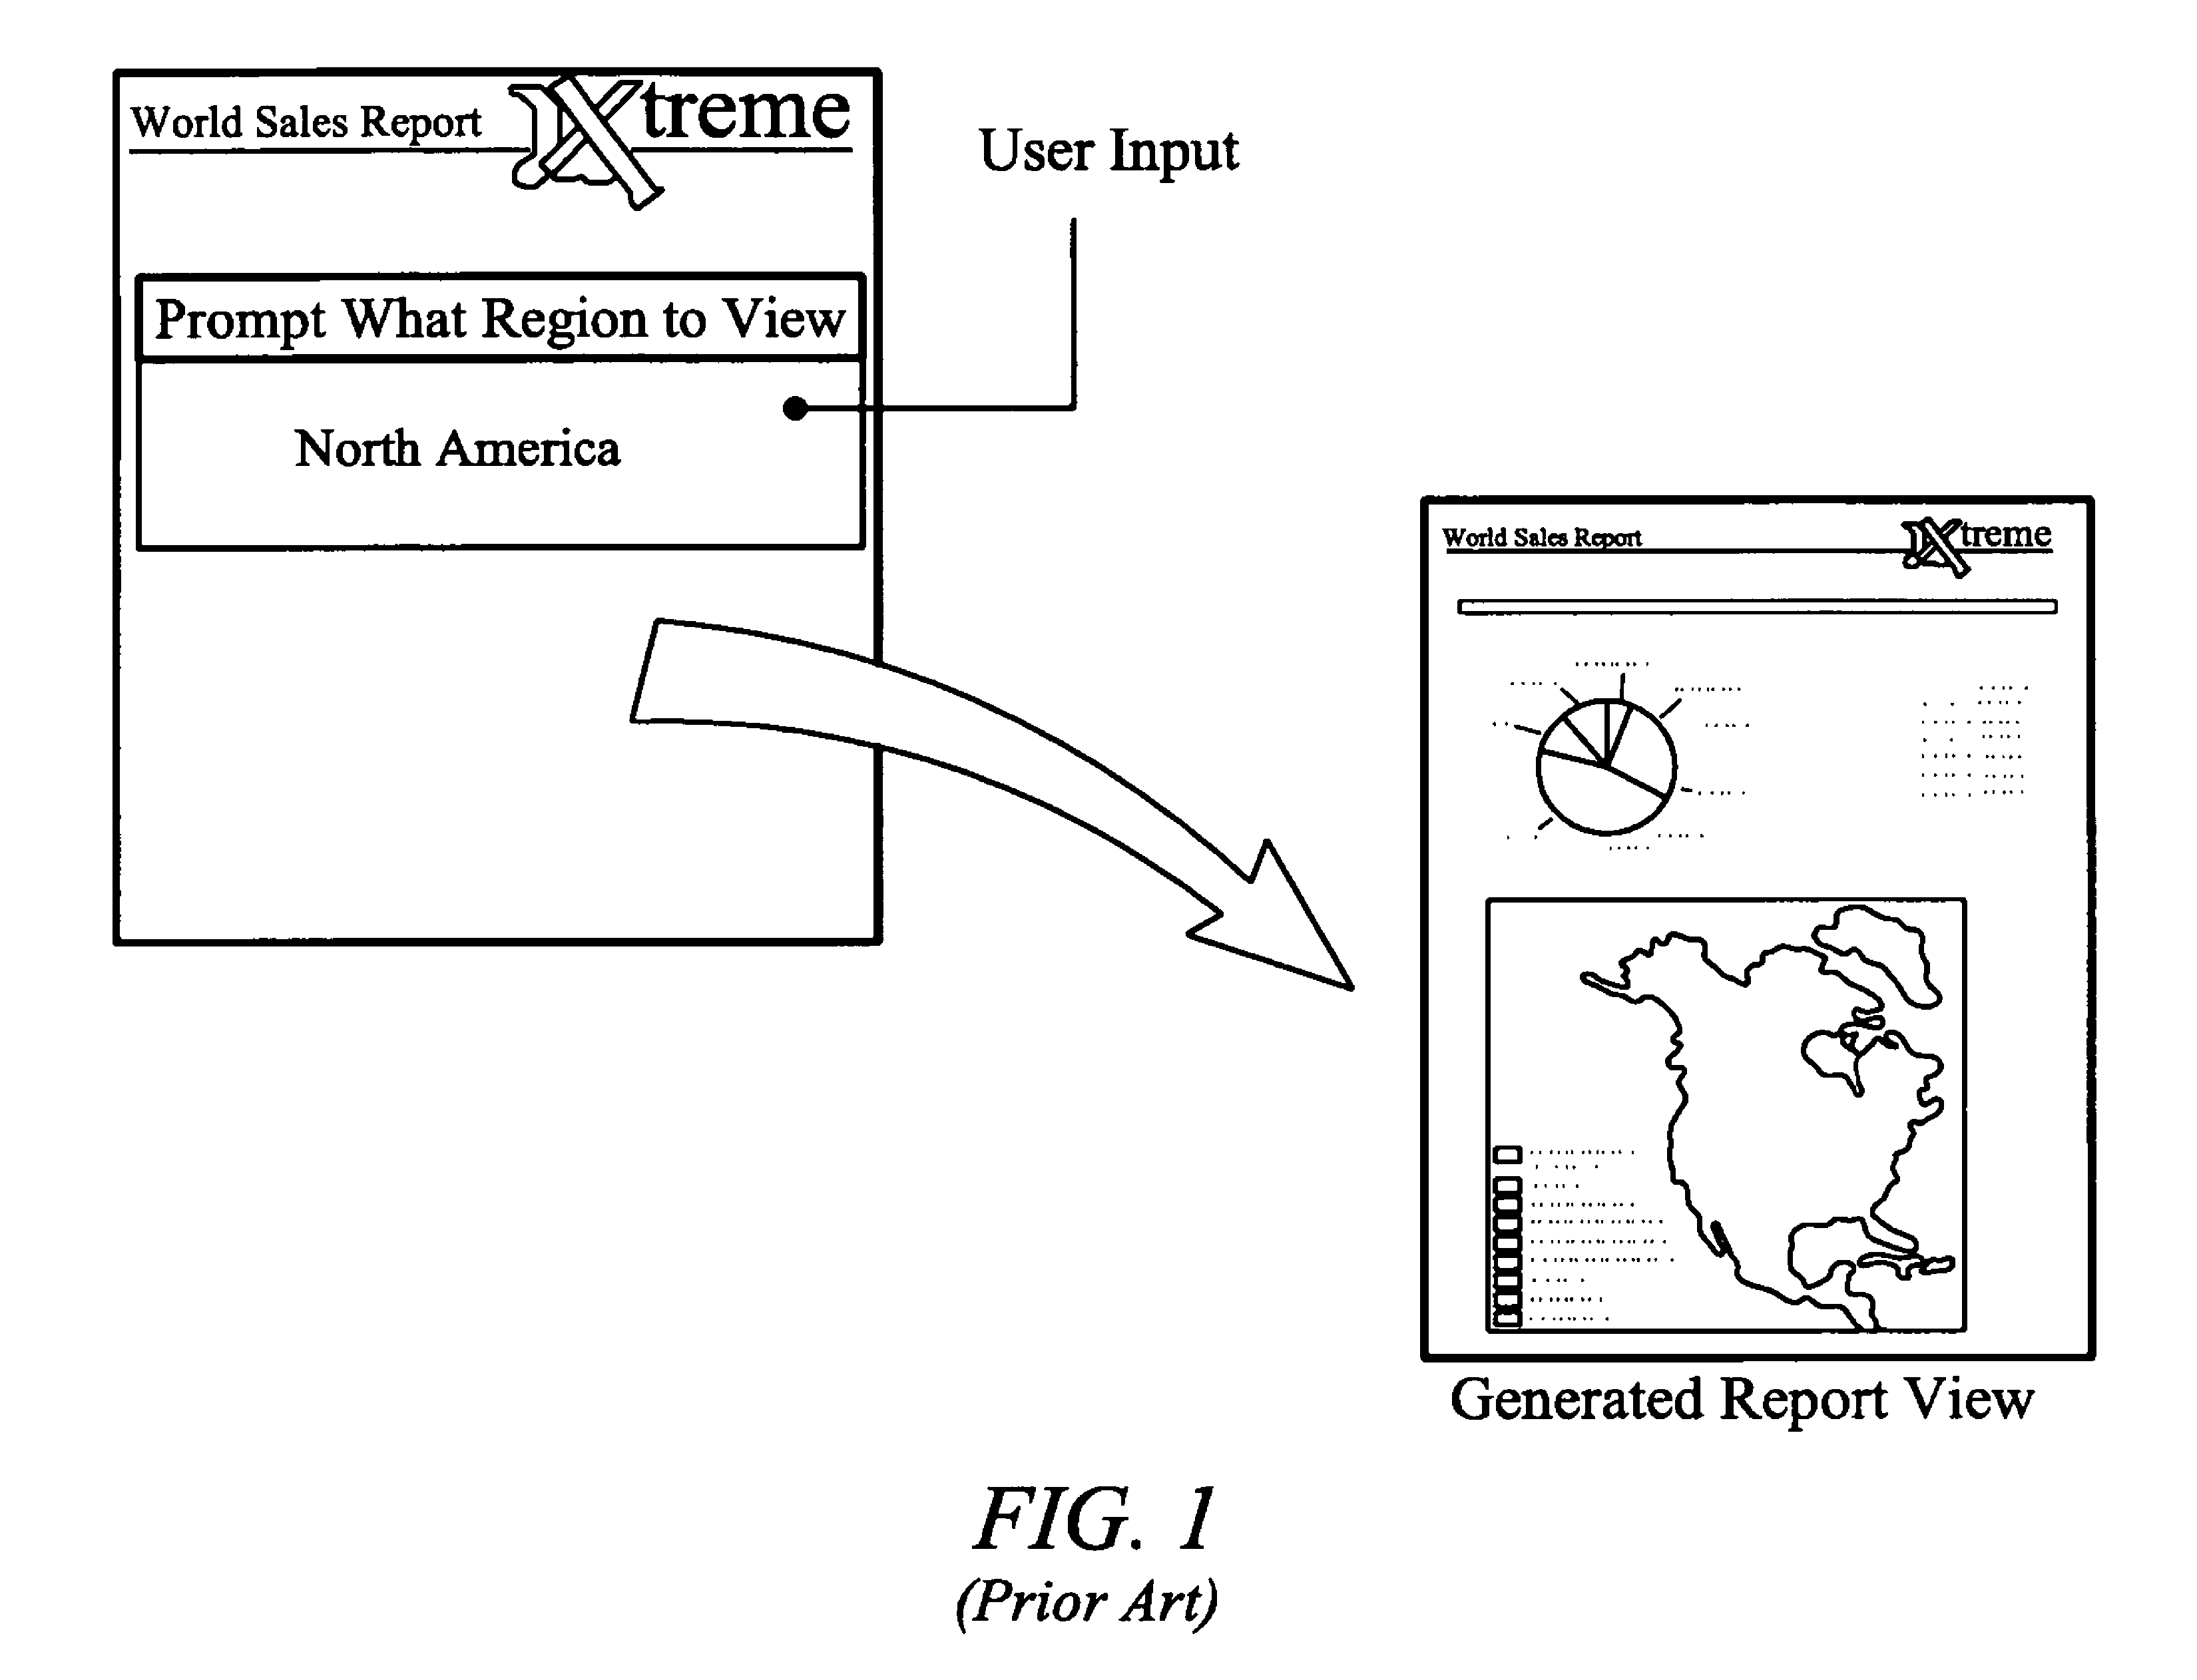 Apparatus and method for generating reports from shared objects